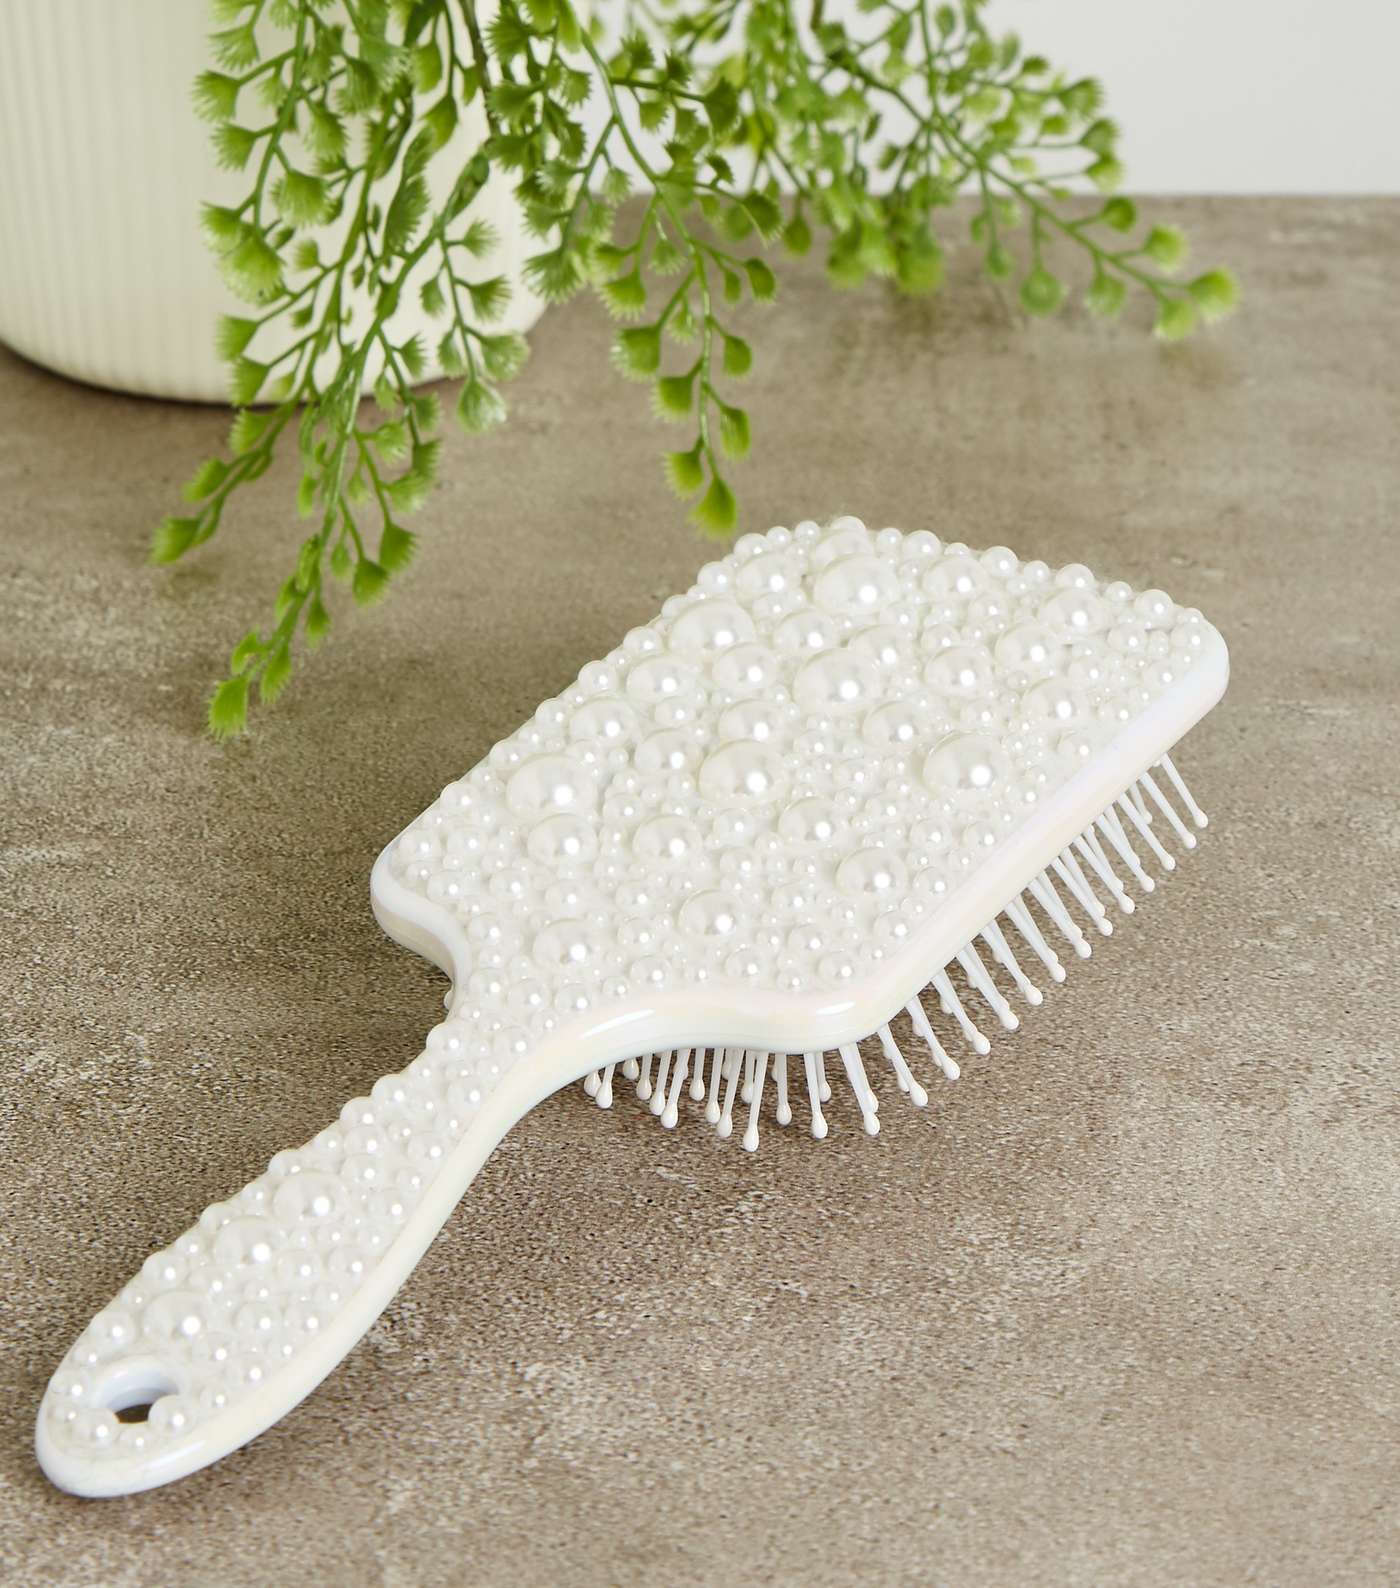 White Iridescent Faux Pearl Paddle Hair Brush Image 2